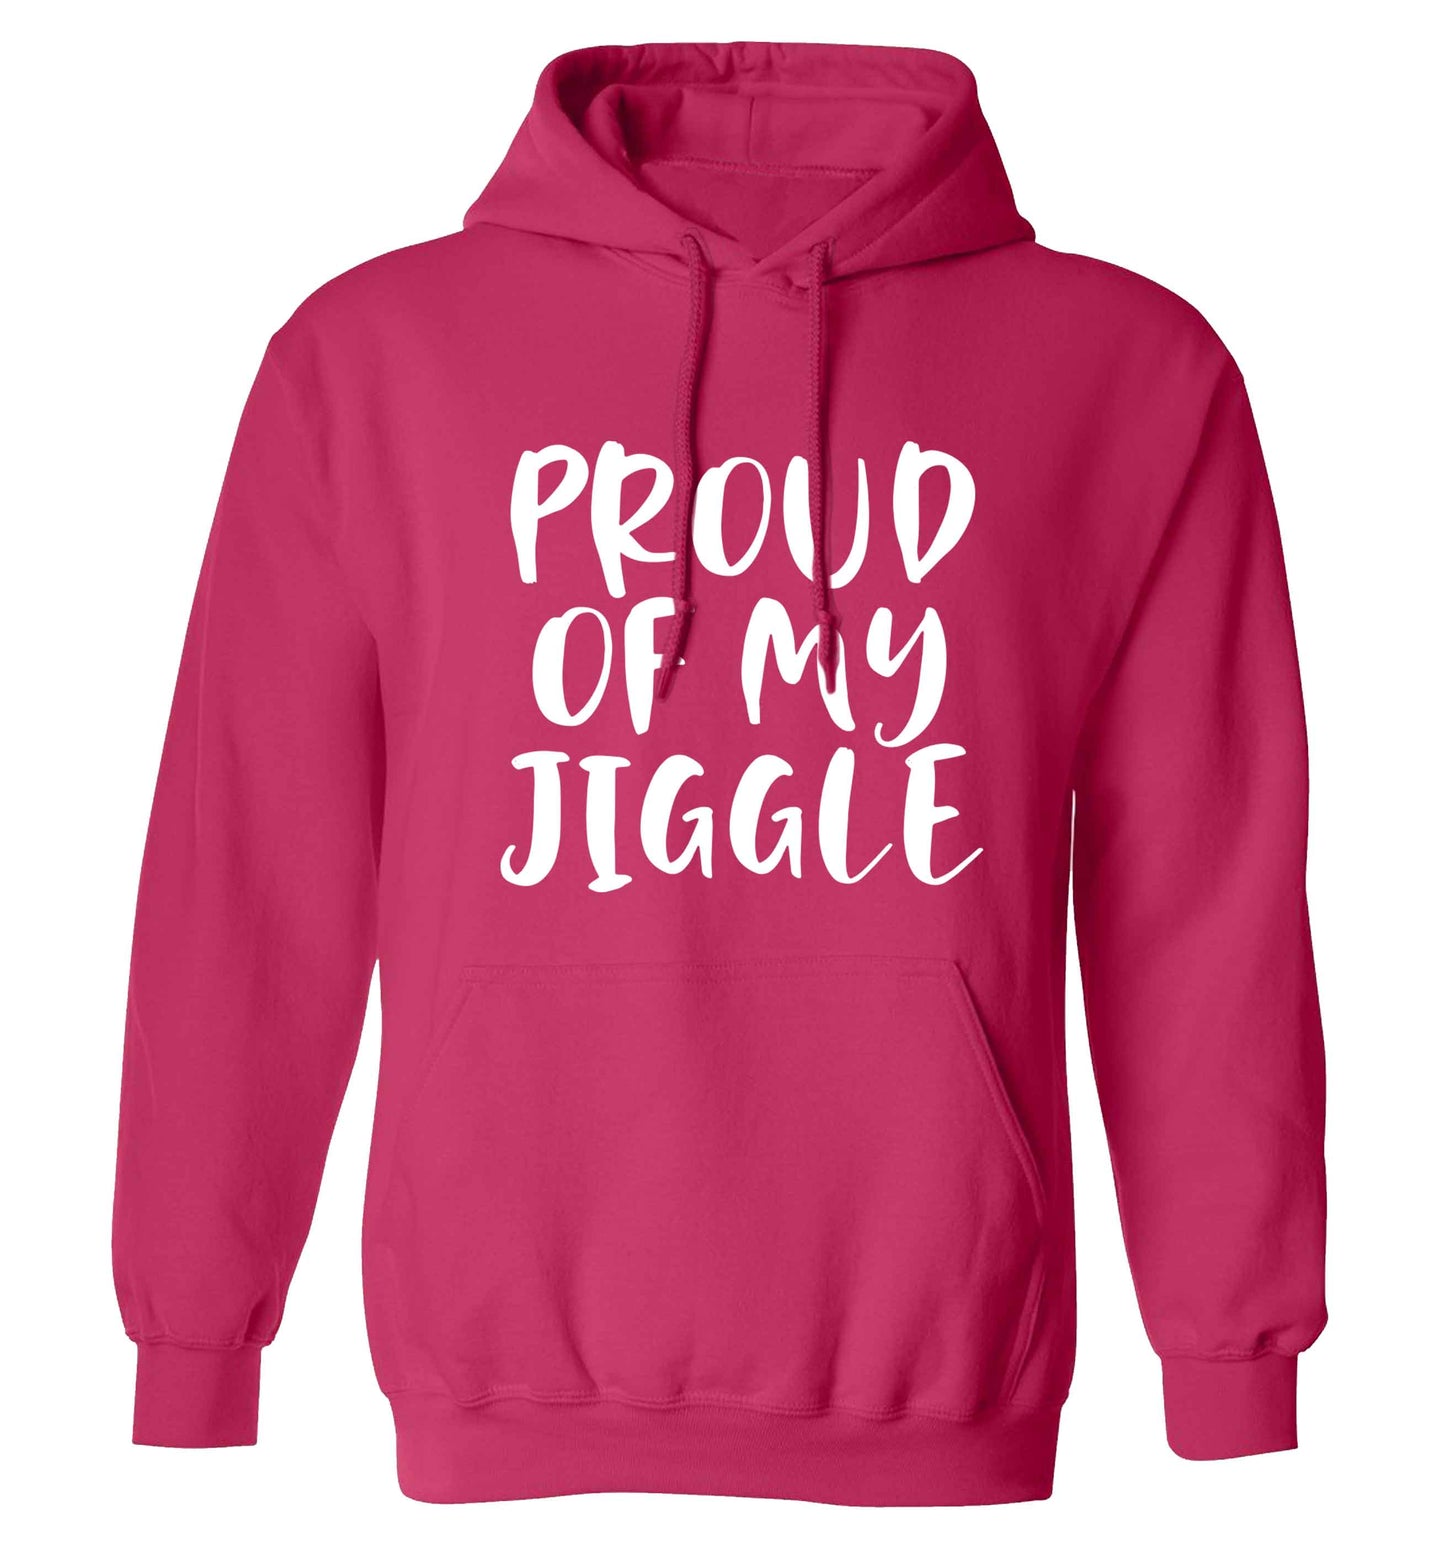 Proud of my jiggle adults unisex pink hoodie 2XL